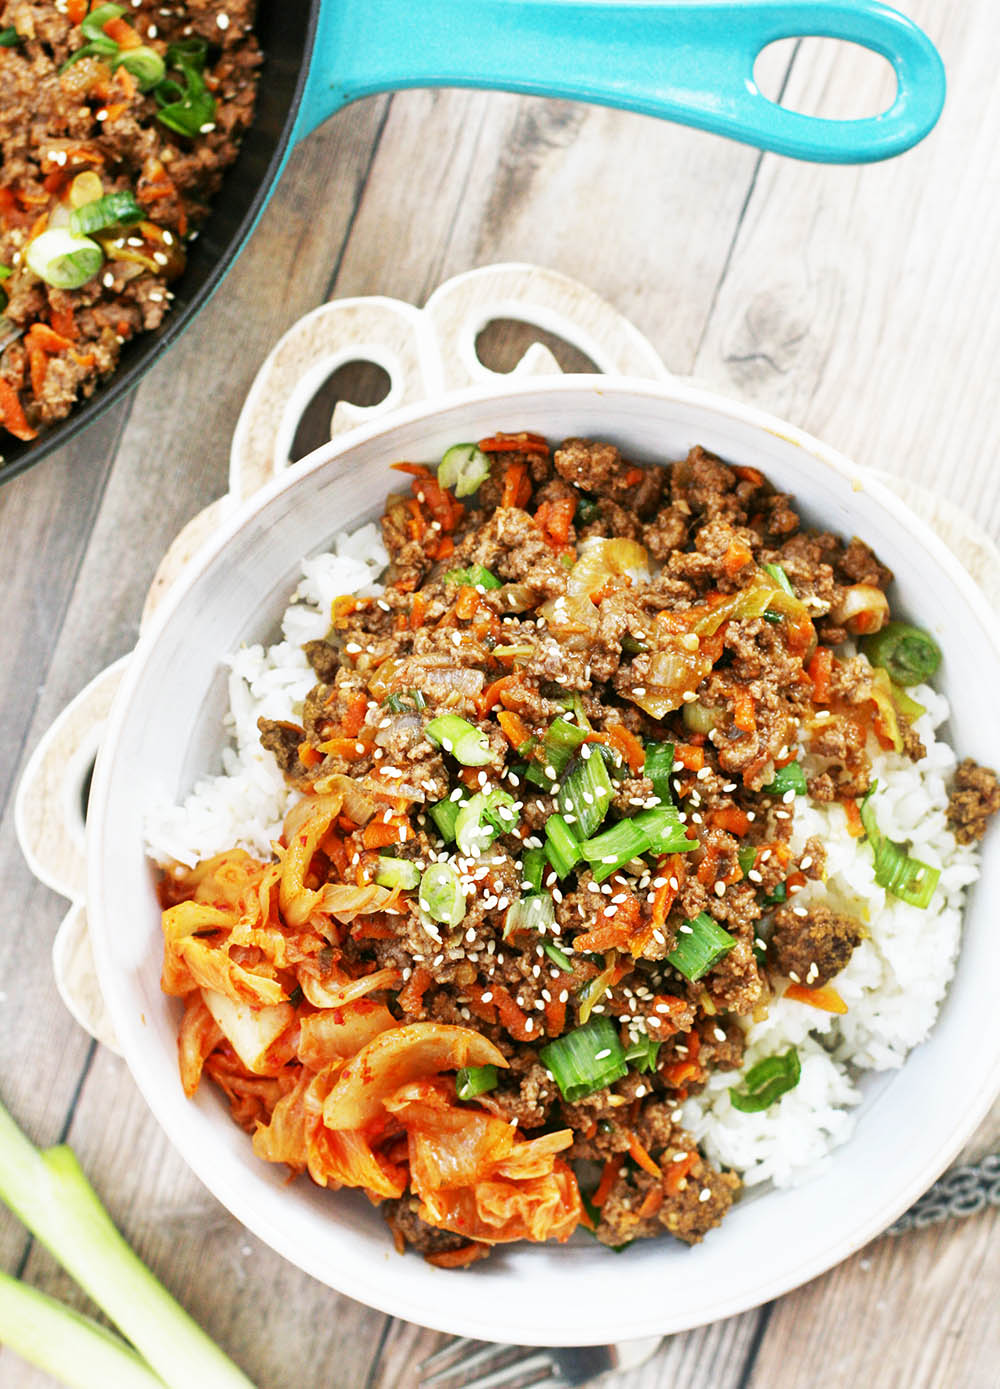 Korean ground beef bowls: A simple recipe with paleo-friendly ingredients.